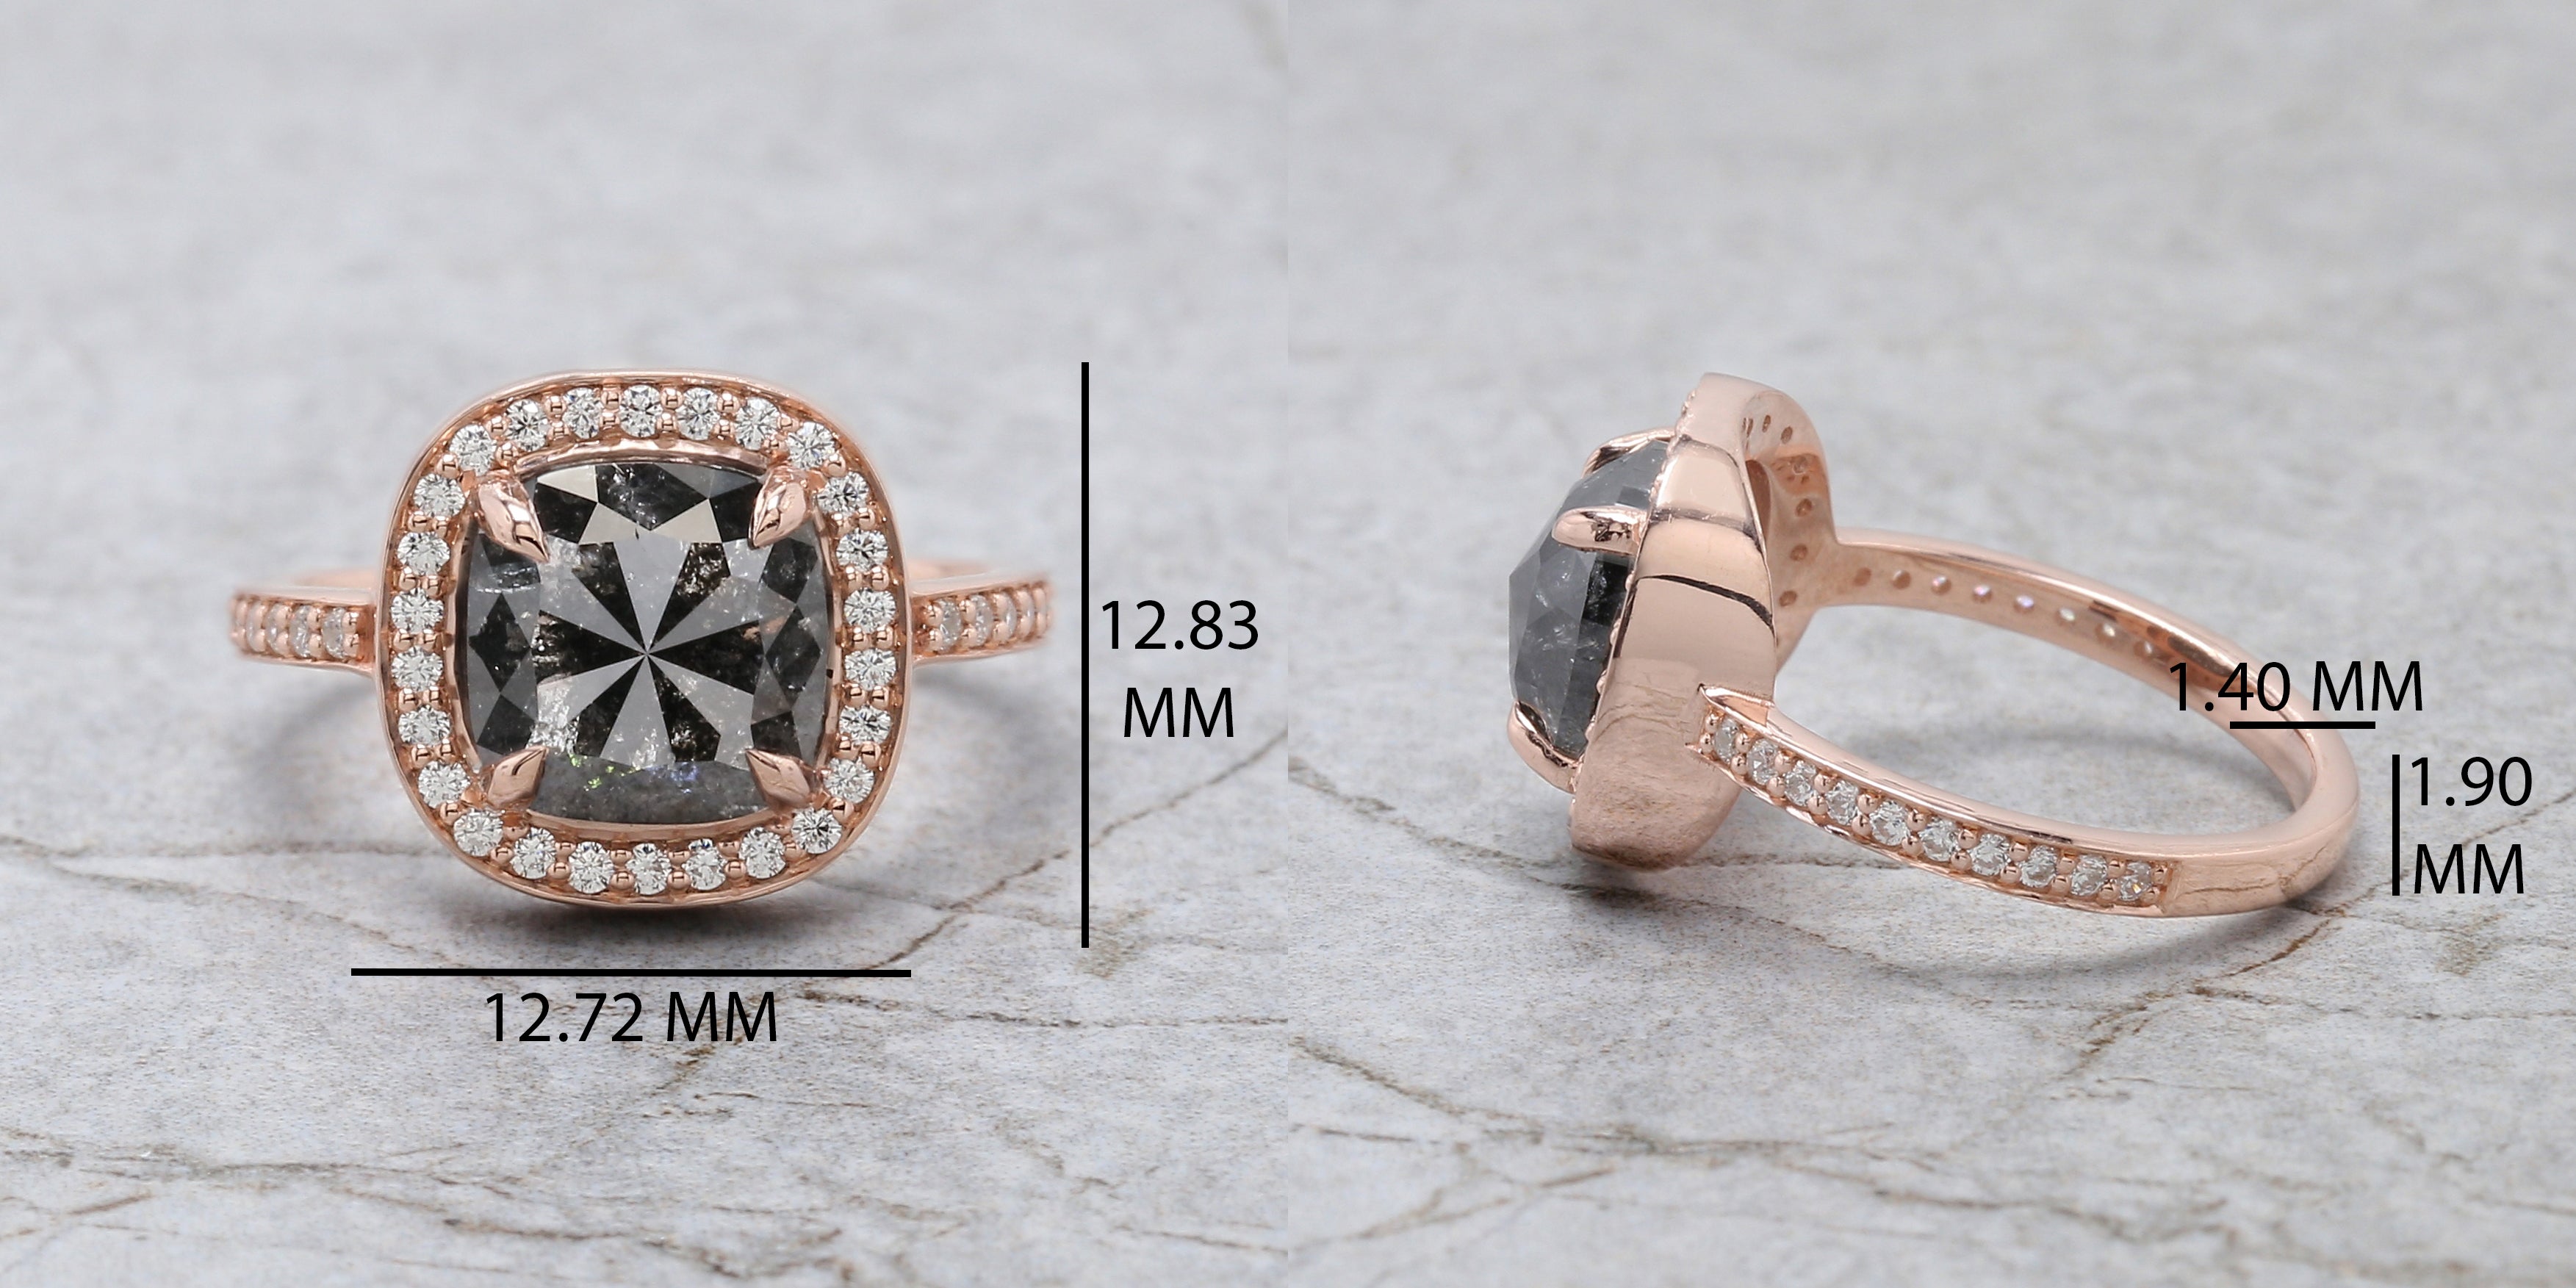 Cushion Cut Salt And Pepper Diamond Ring 2.92 Ct 8.40 MM Cushion Diamond Ring 14K Solid Rose Gold Silver Engagement Ring Gift For Her QL2137